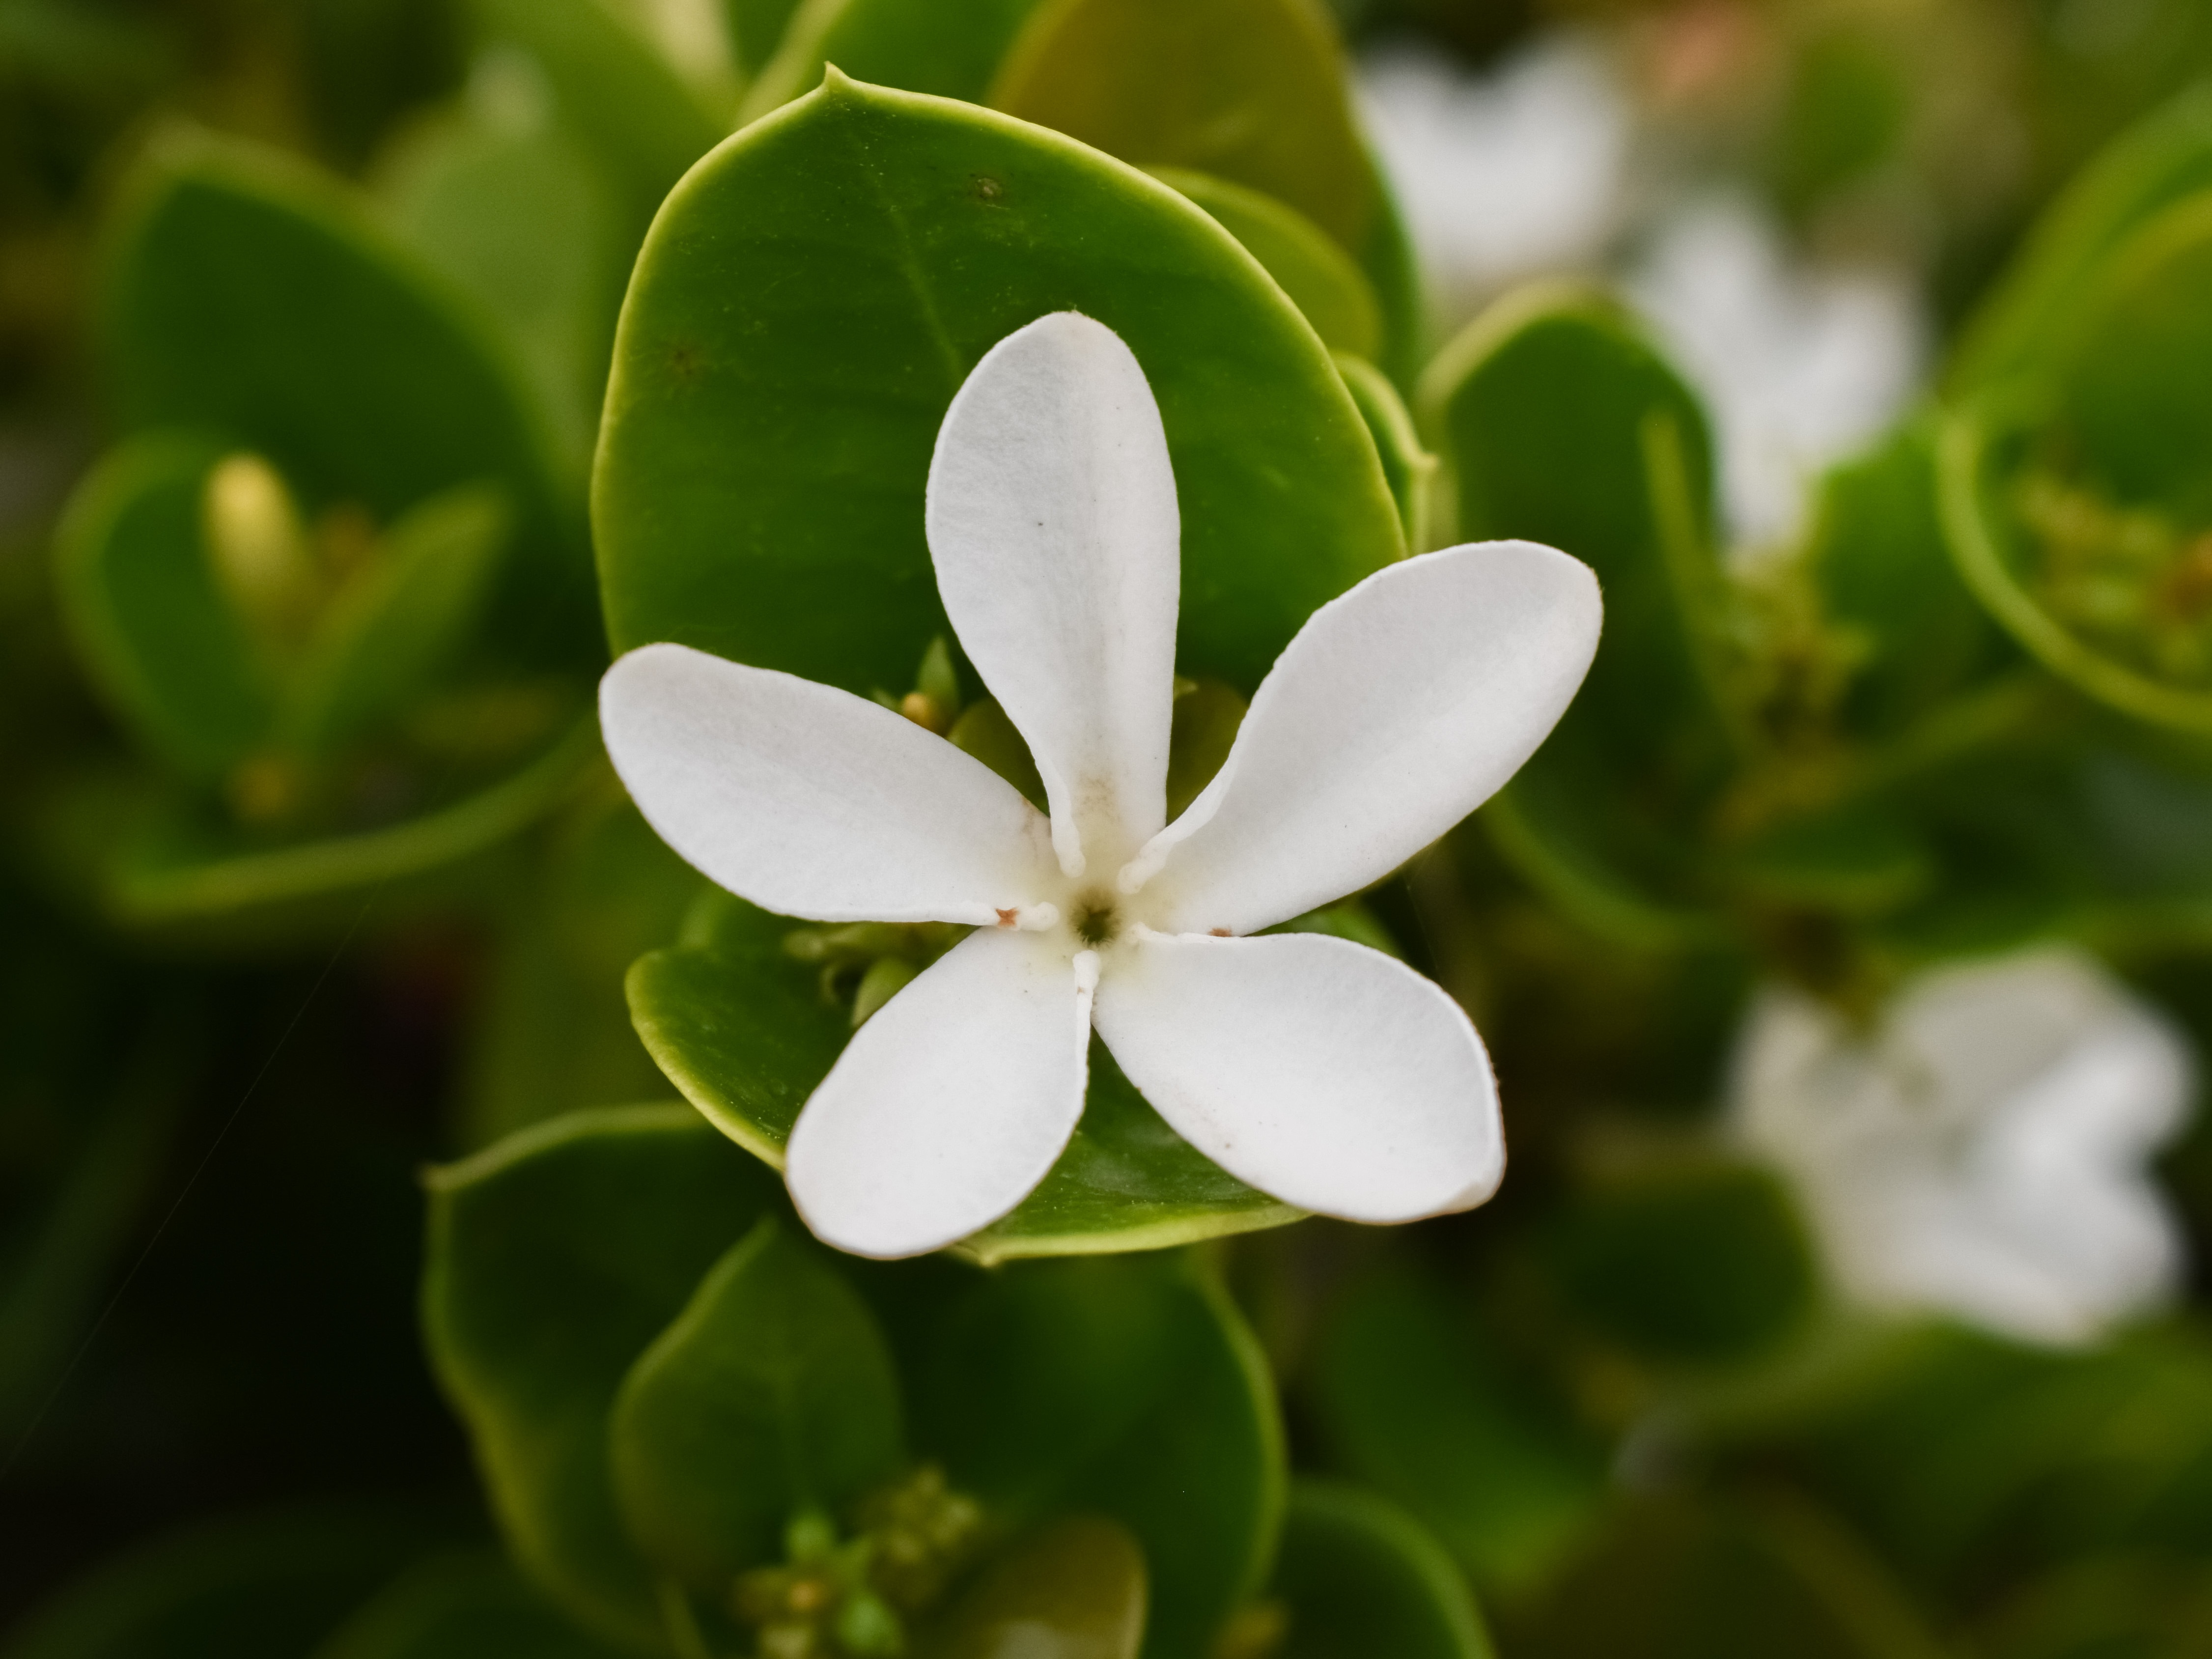 White Natural Flower in spring free image download